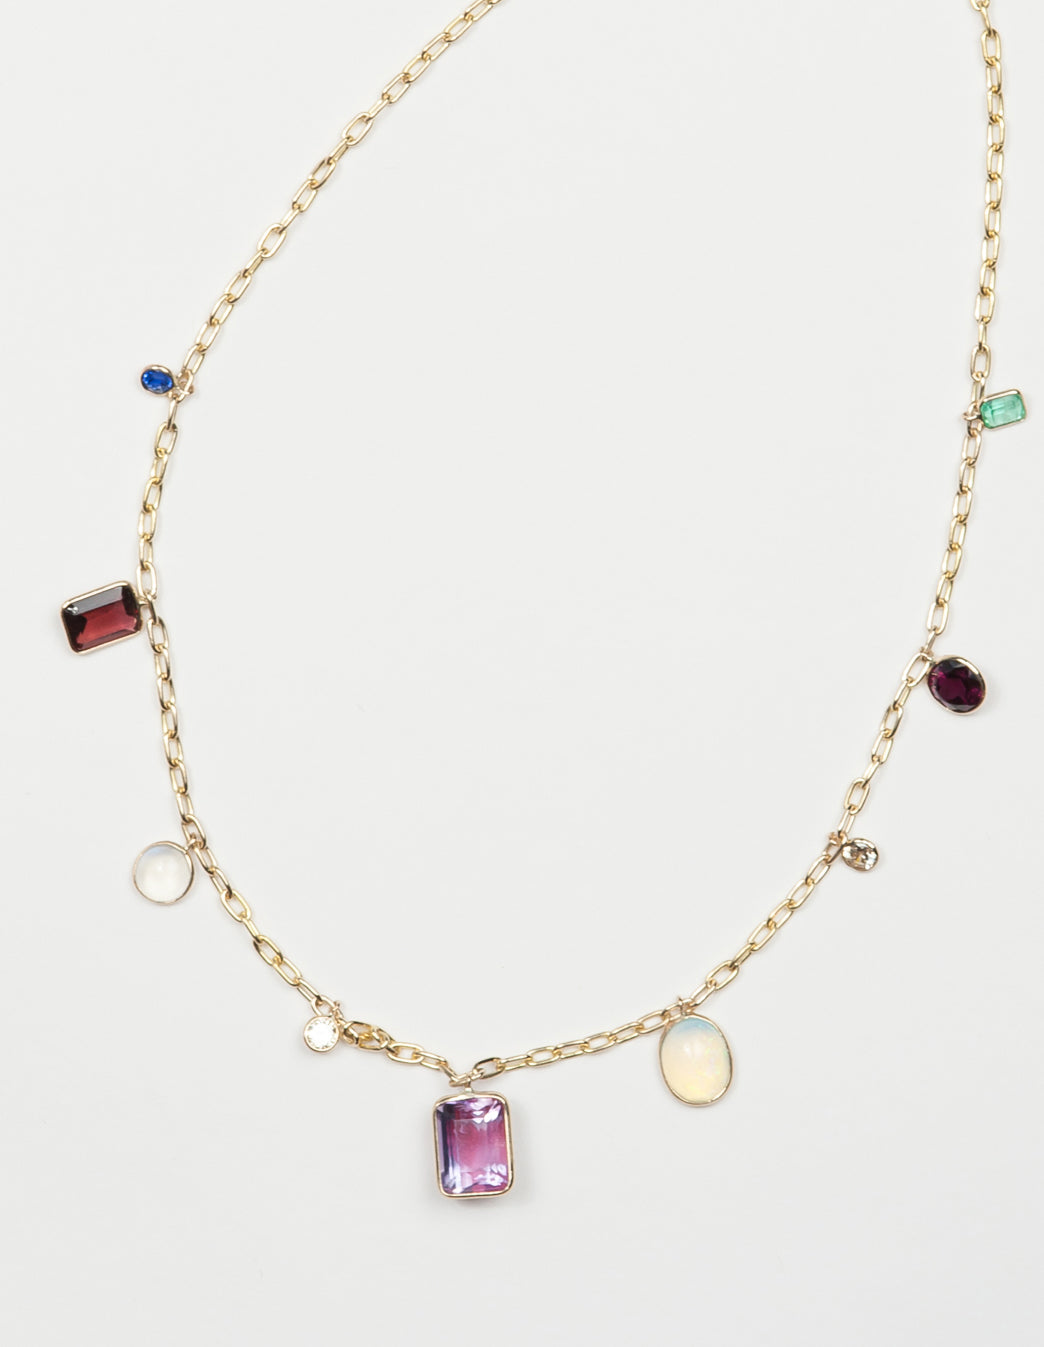 A lifetime of gem collecting >>> a gem charm necklace on a 14kt gold chain. 